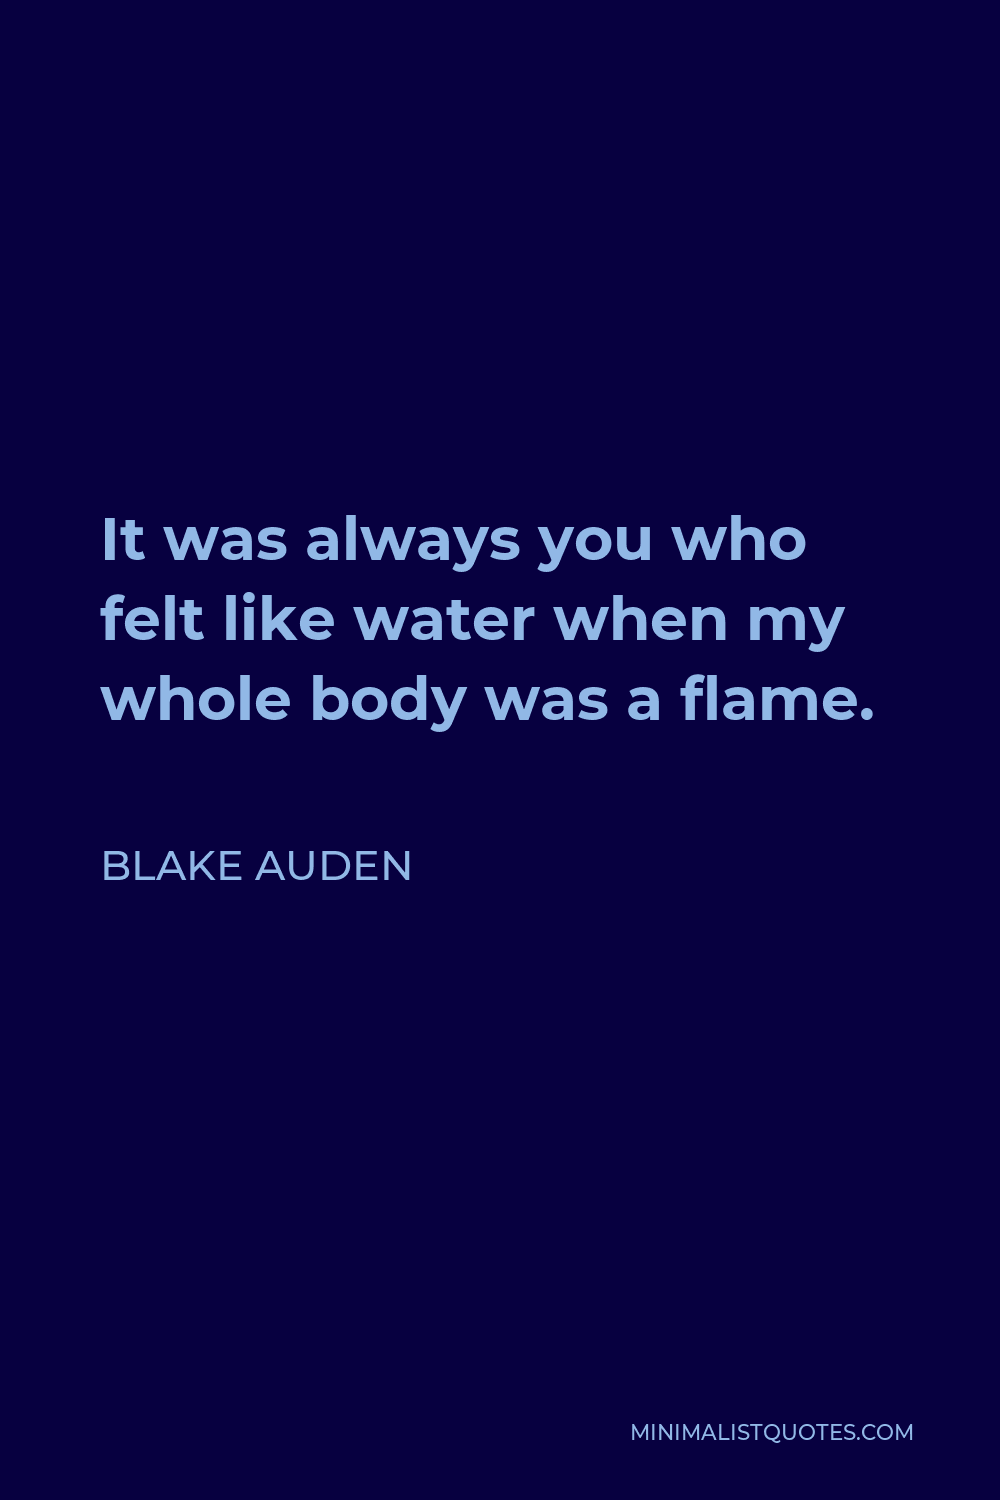 Blake Auden Quote - It was always you who felt like water when my whole body was a flame.